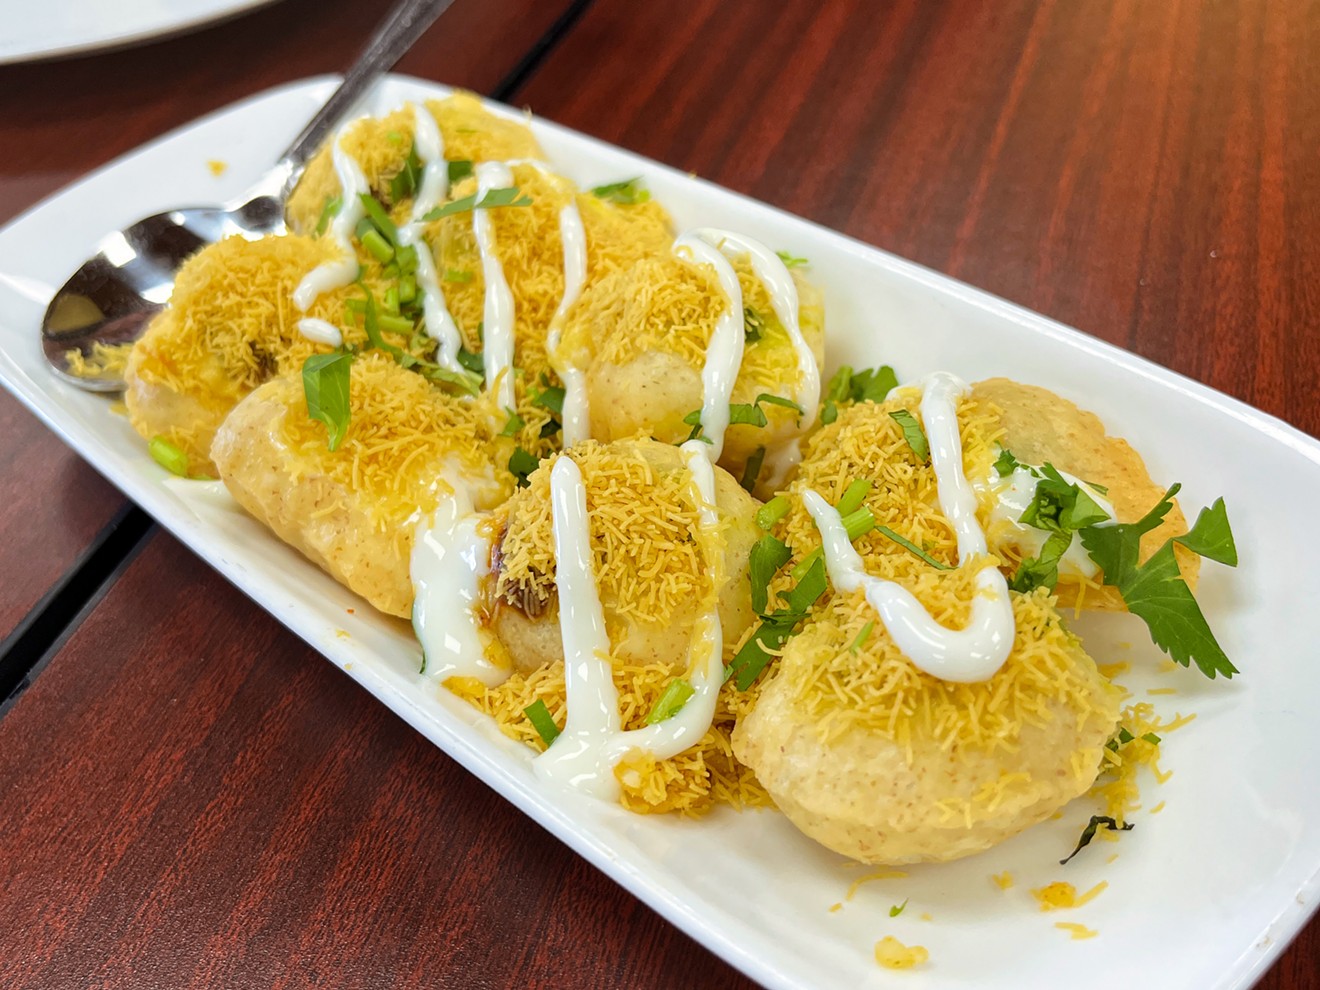 Dahi puri are crisped wheat shells filled with vegetables and a wild combinations of chutneys, yogurts, herbs and sev — tiny chickpea noodles.